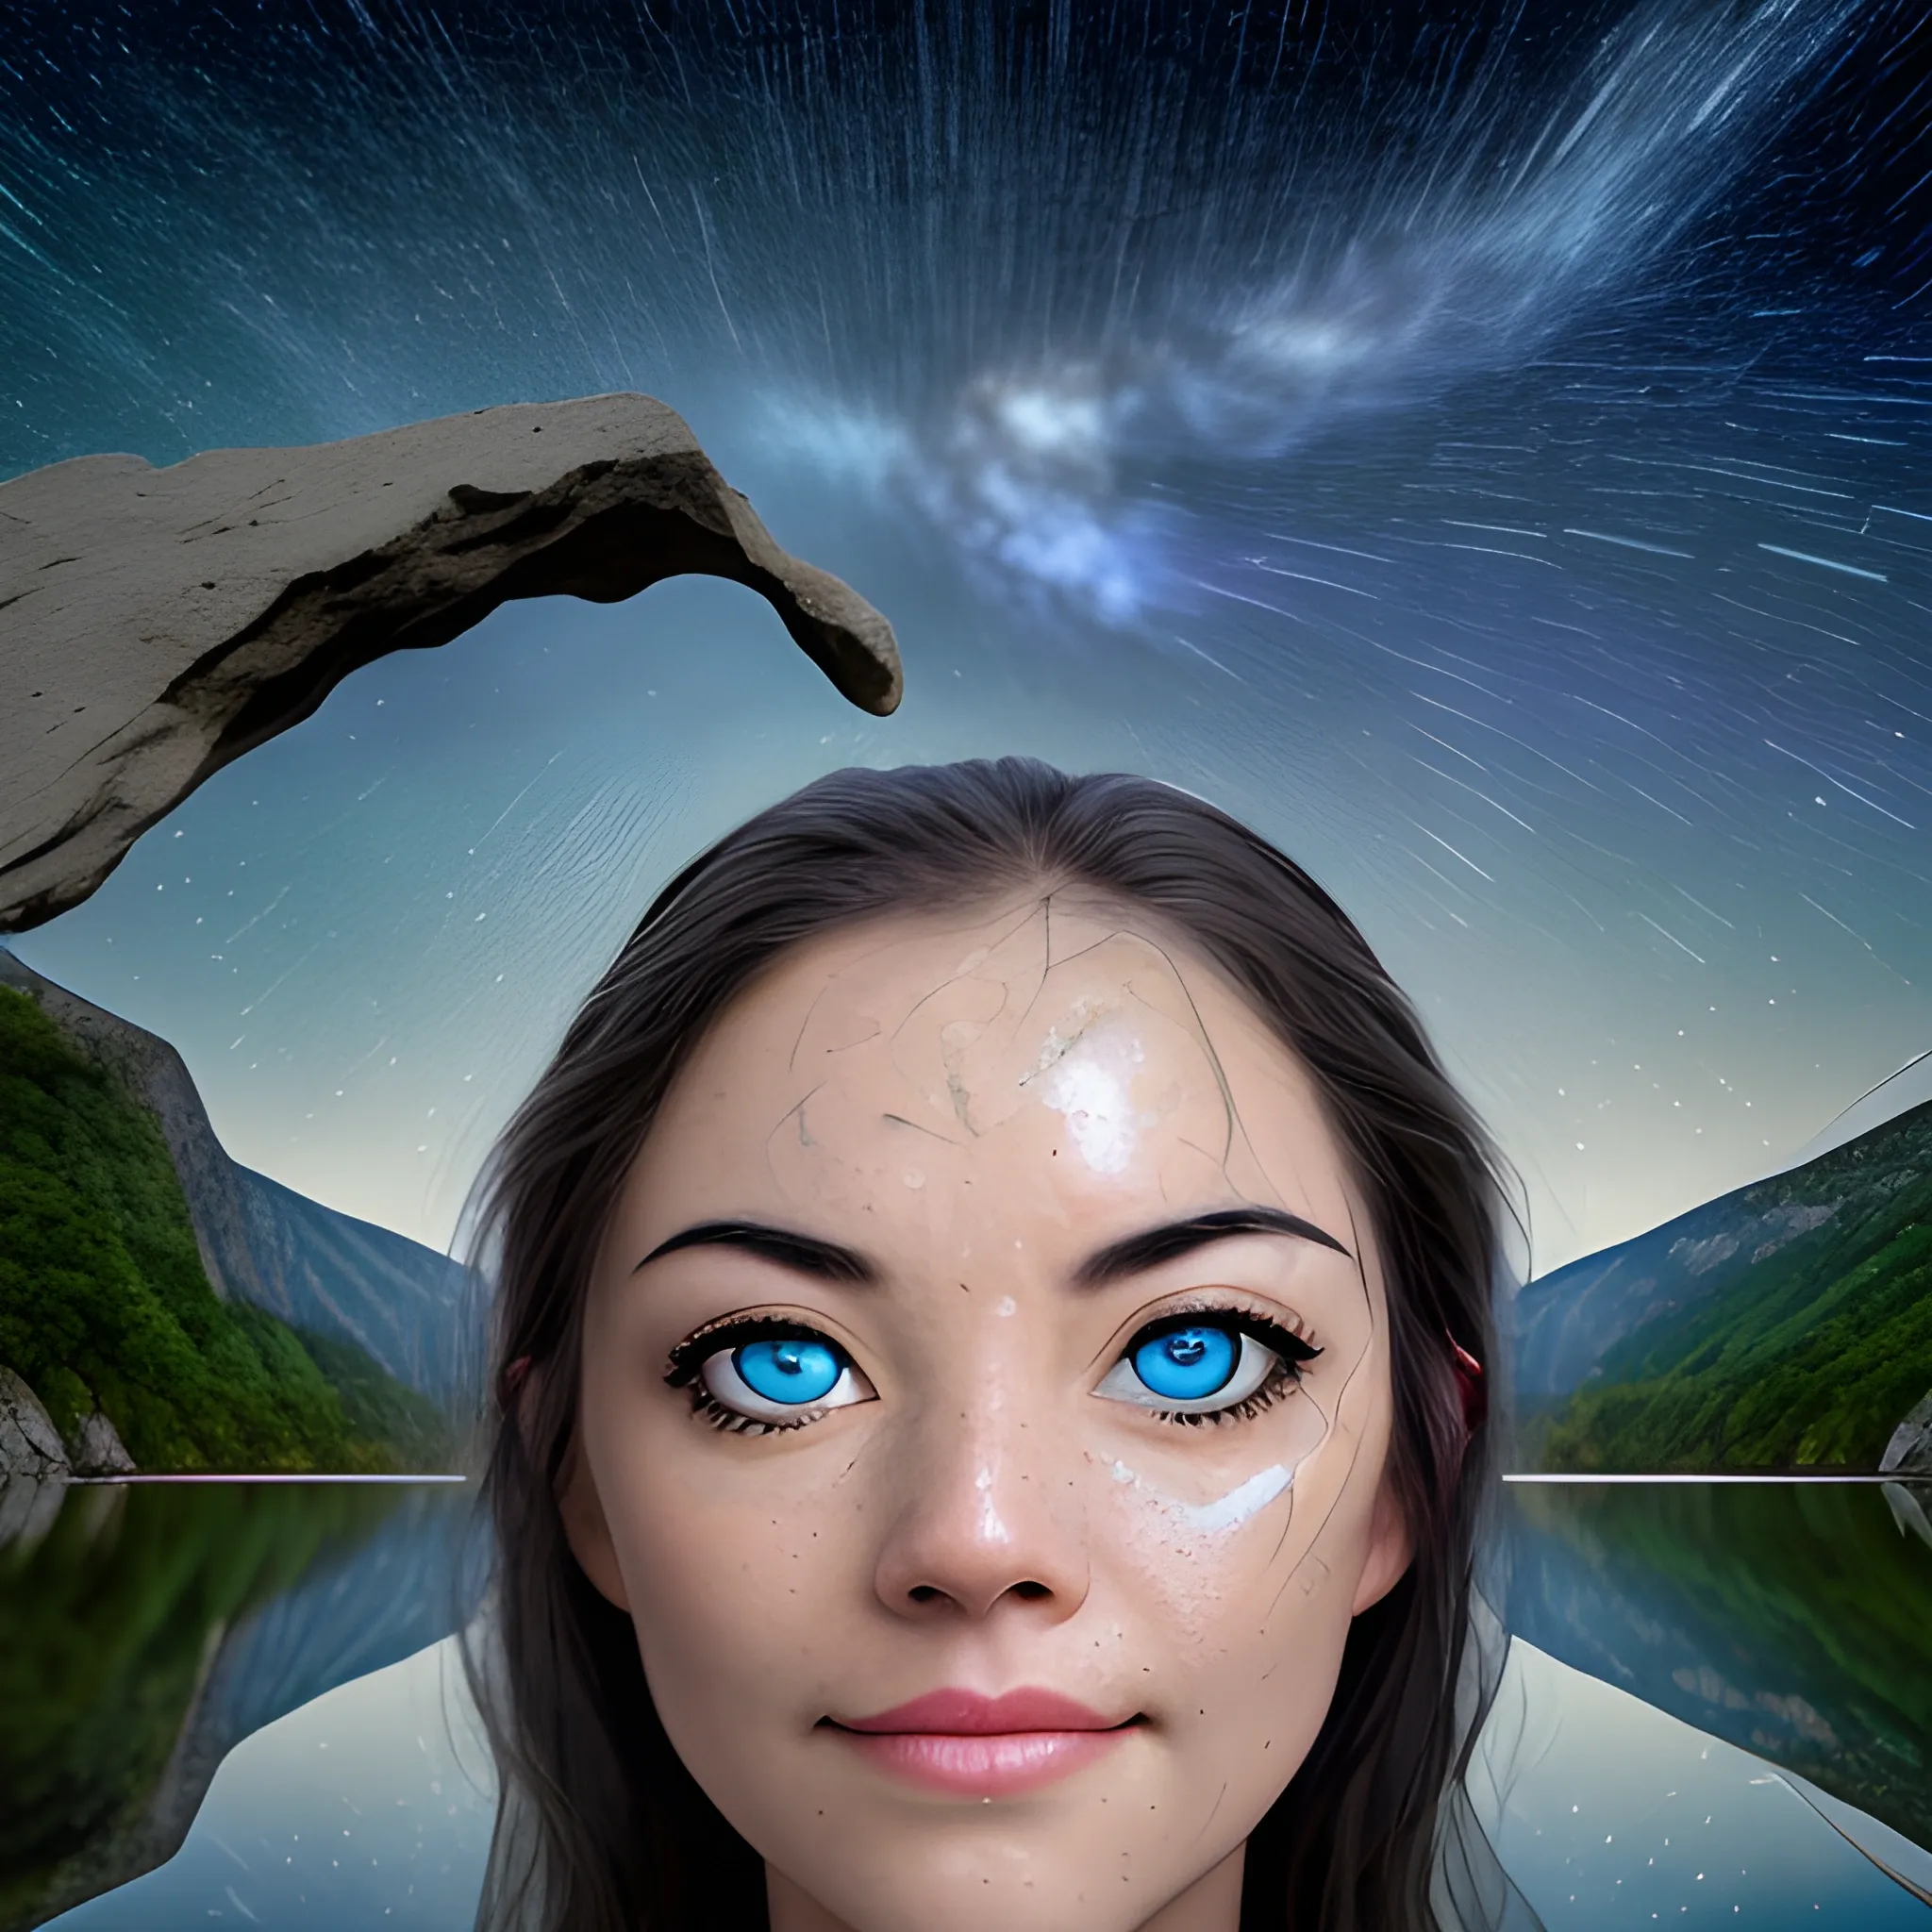 face emerging from a mountain of limestone rock and gushing waterfalls from these 2 eyes towards a lake in the foreground, a starry night sky with spinning stars in the background, 4K ulta 